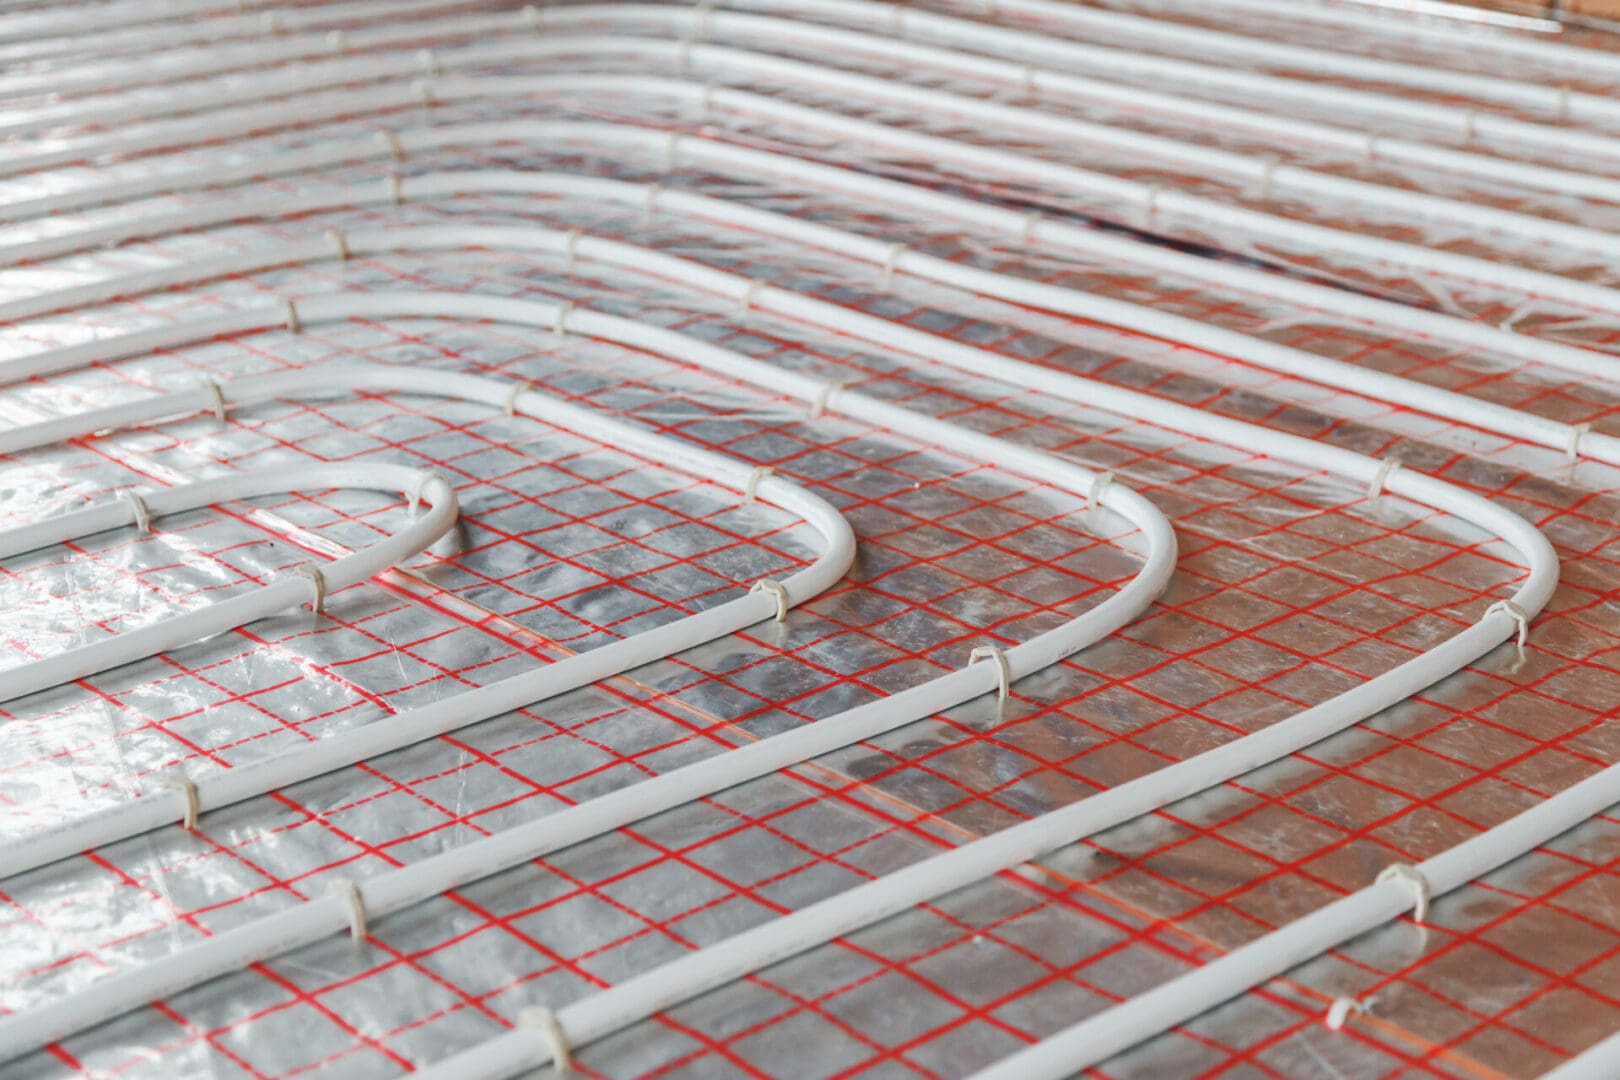 A floor heating system with red pipes and wires.